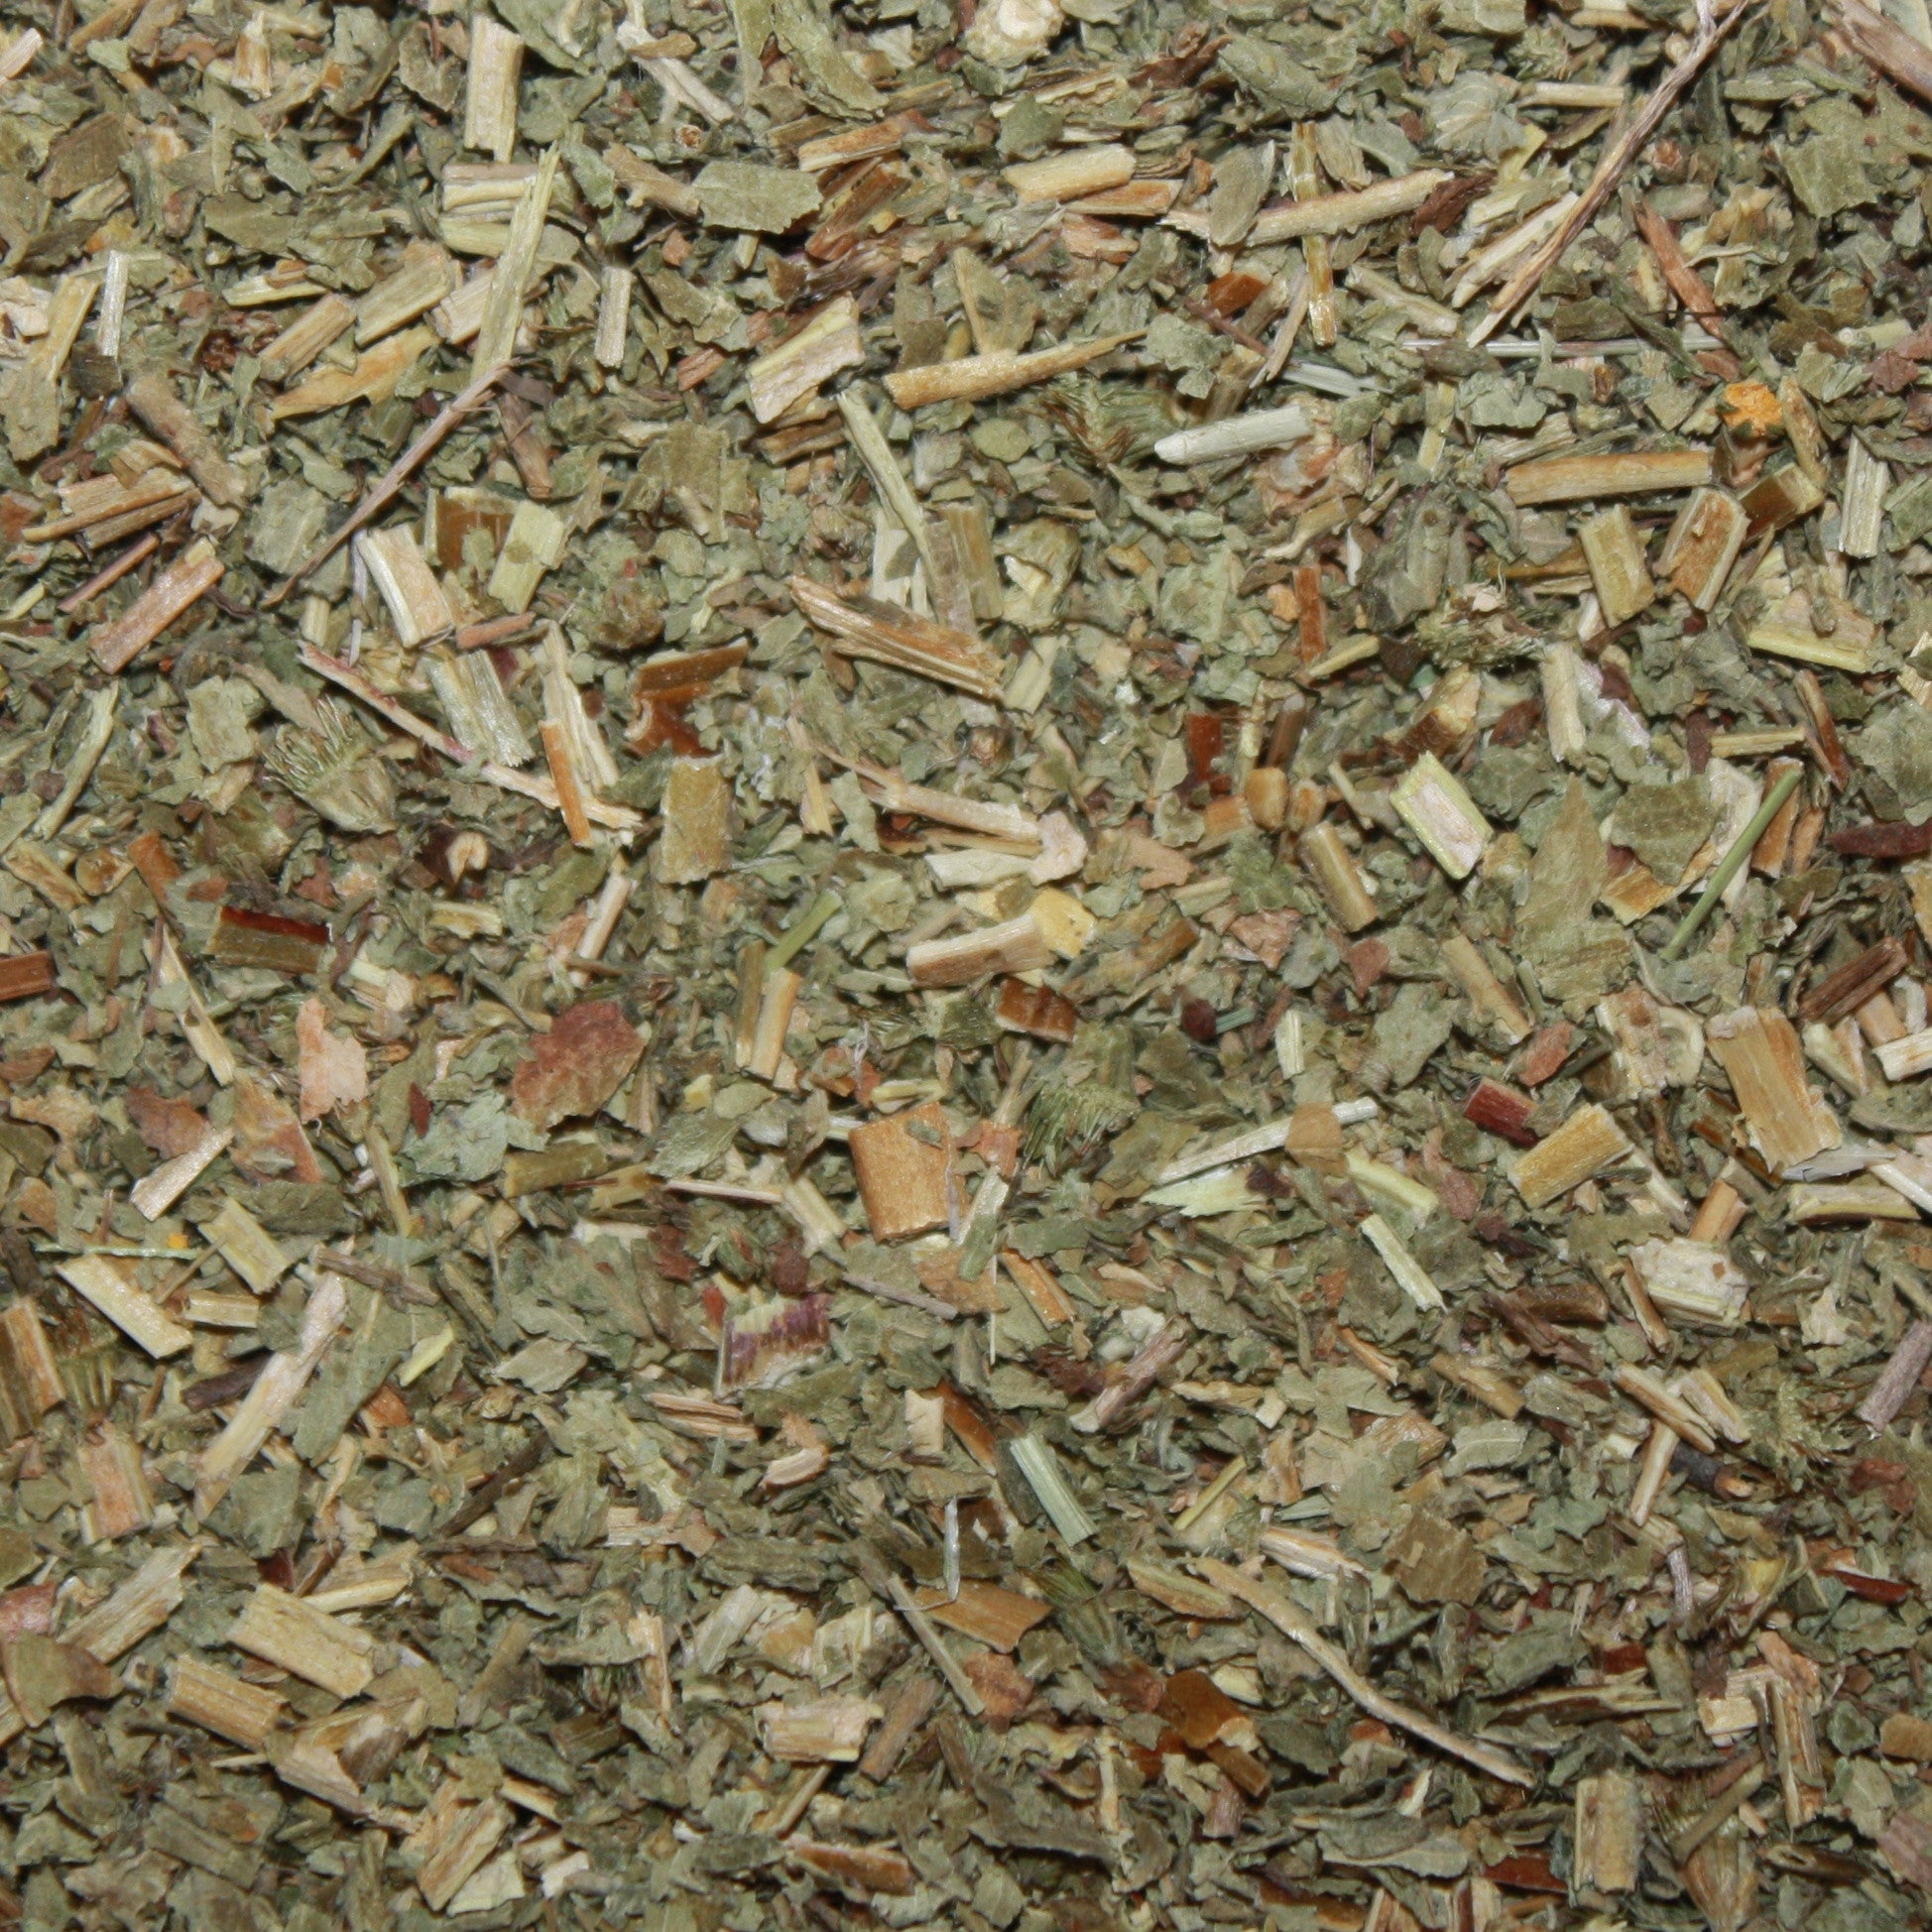 Dried Cut Agrimony - Magical Herbs for Ritual, Spells & Incense Making (25G)